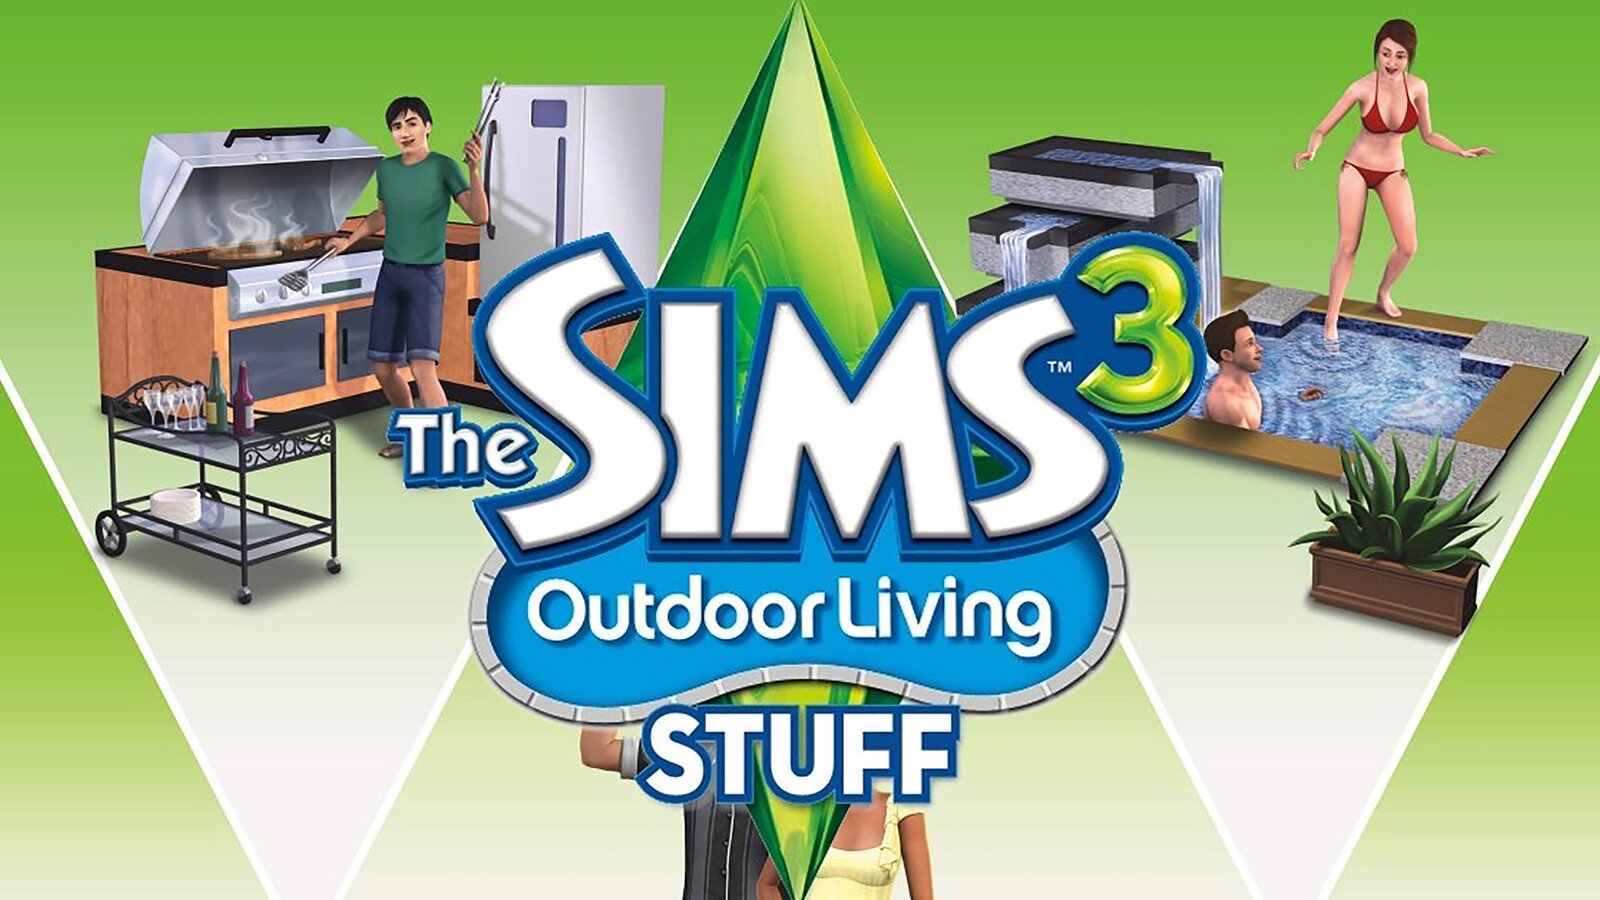 The Sims 3 - Outdoor Living Stuff